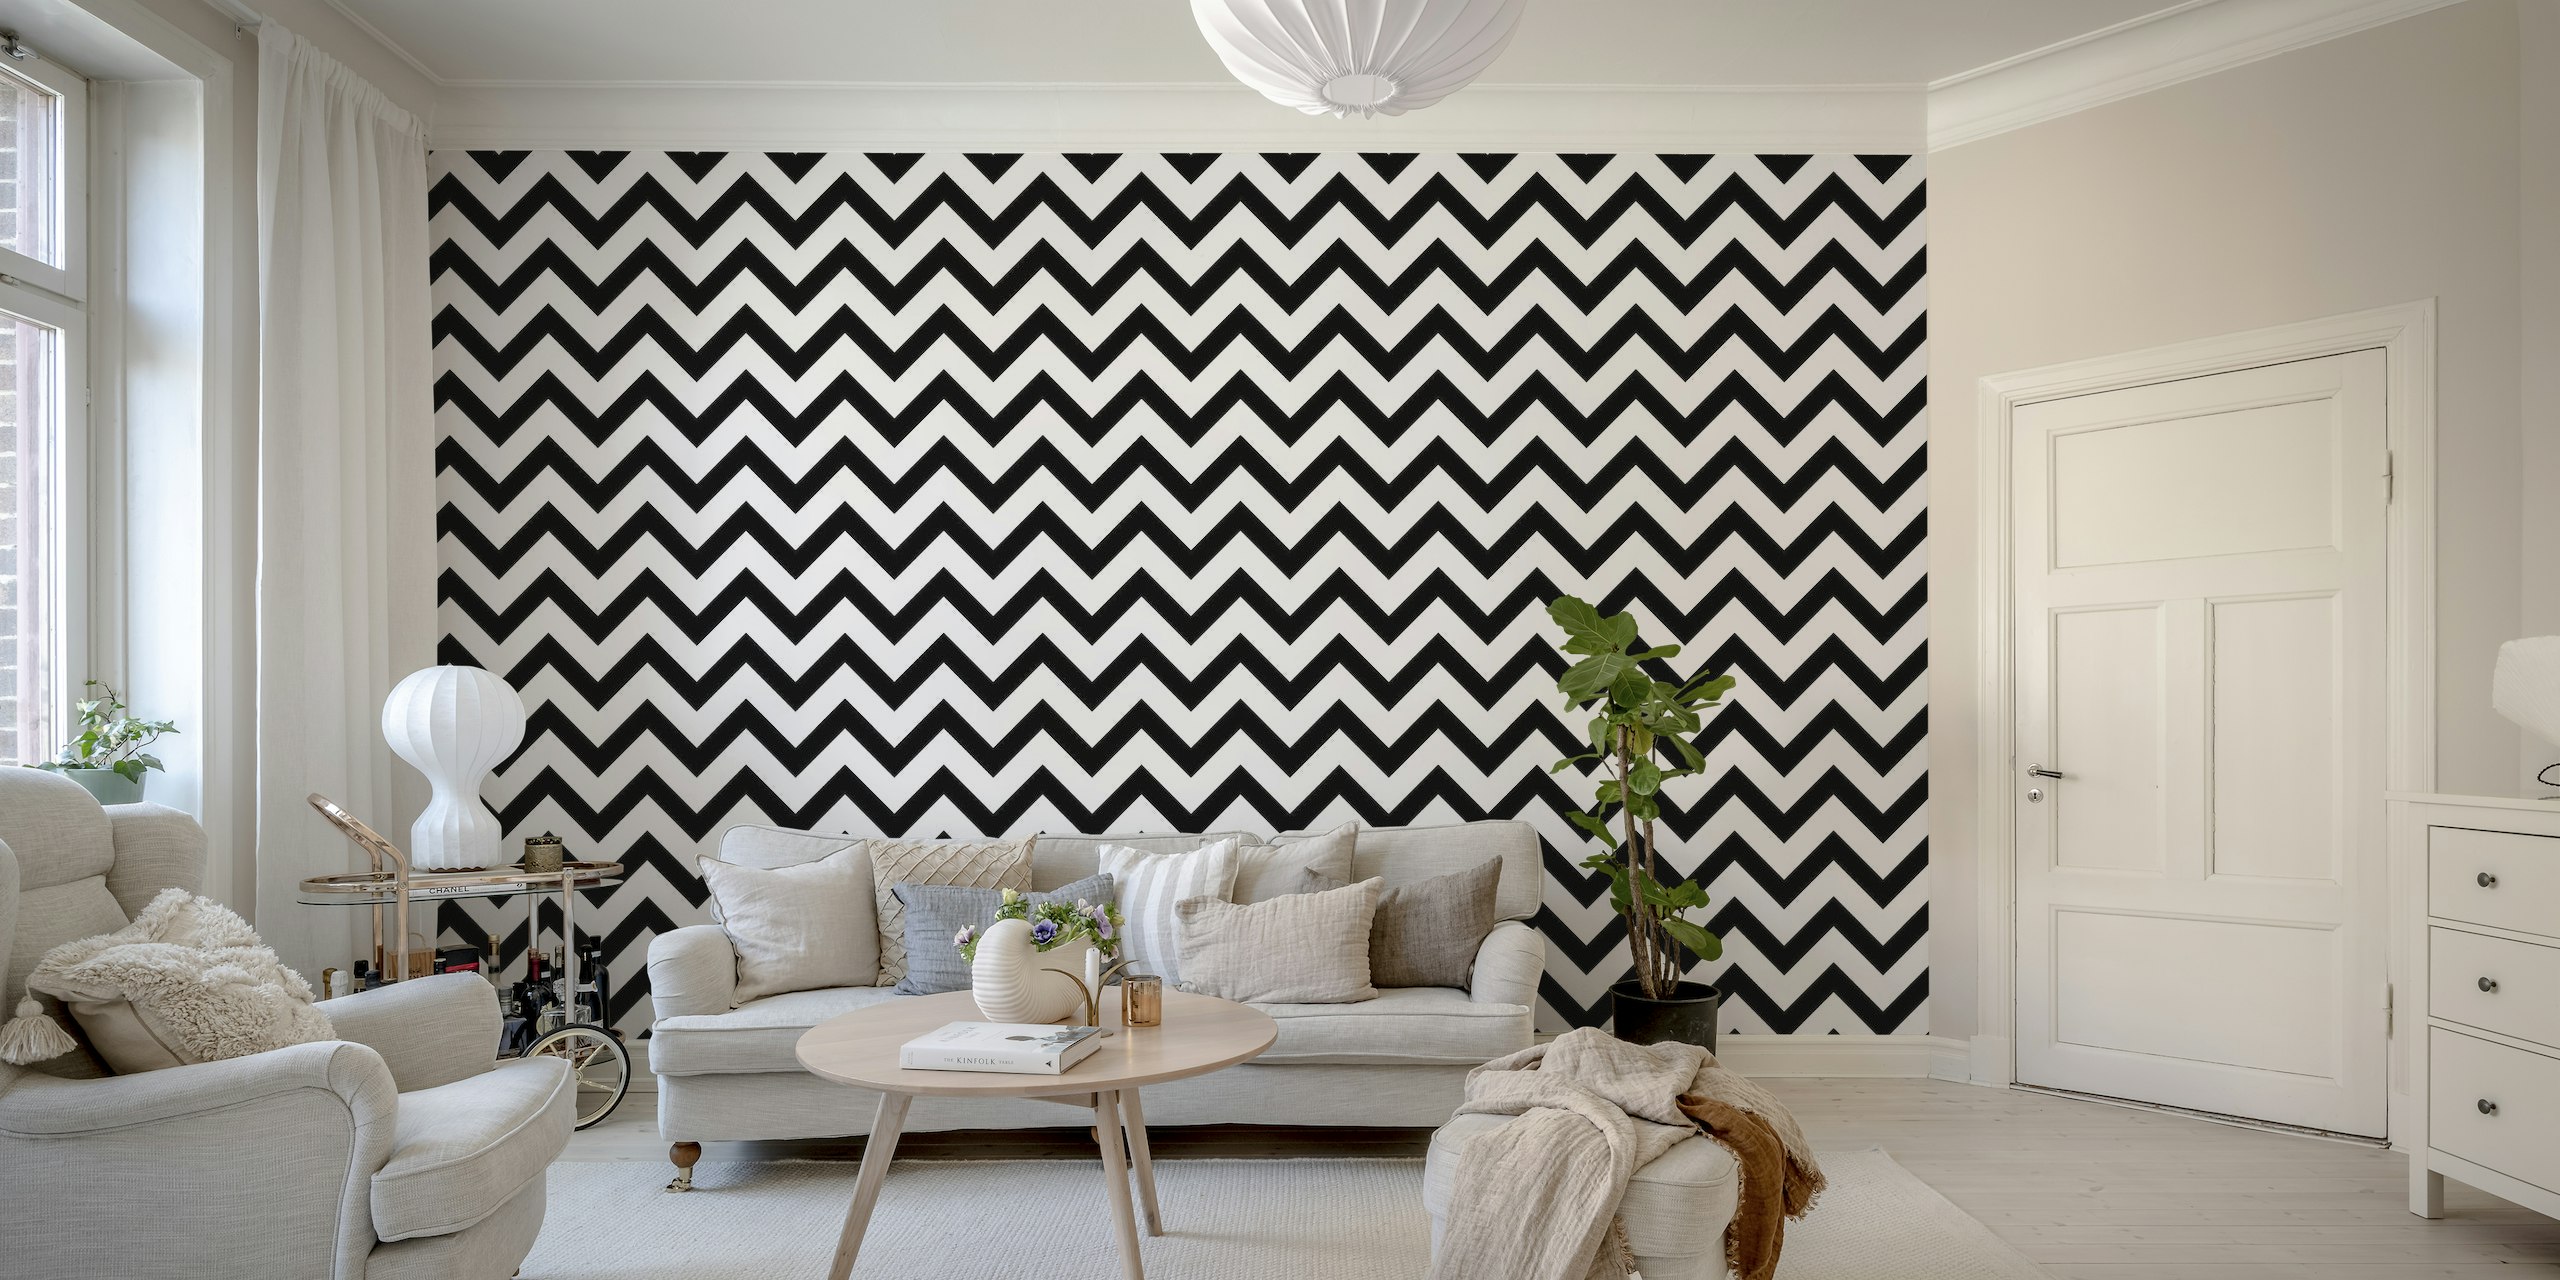 Black and white chevron pattern wall mural